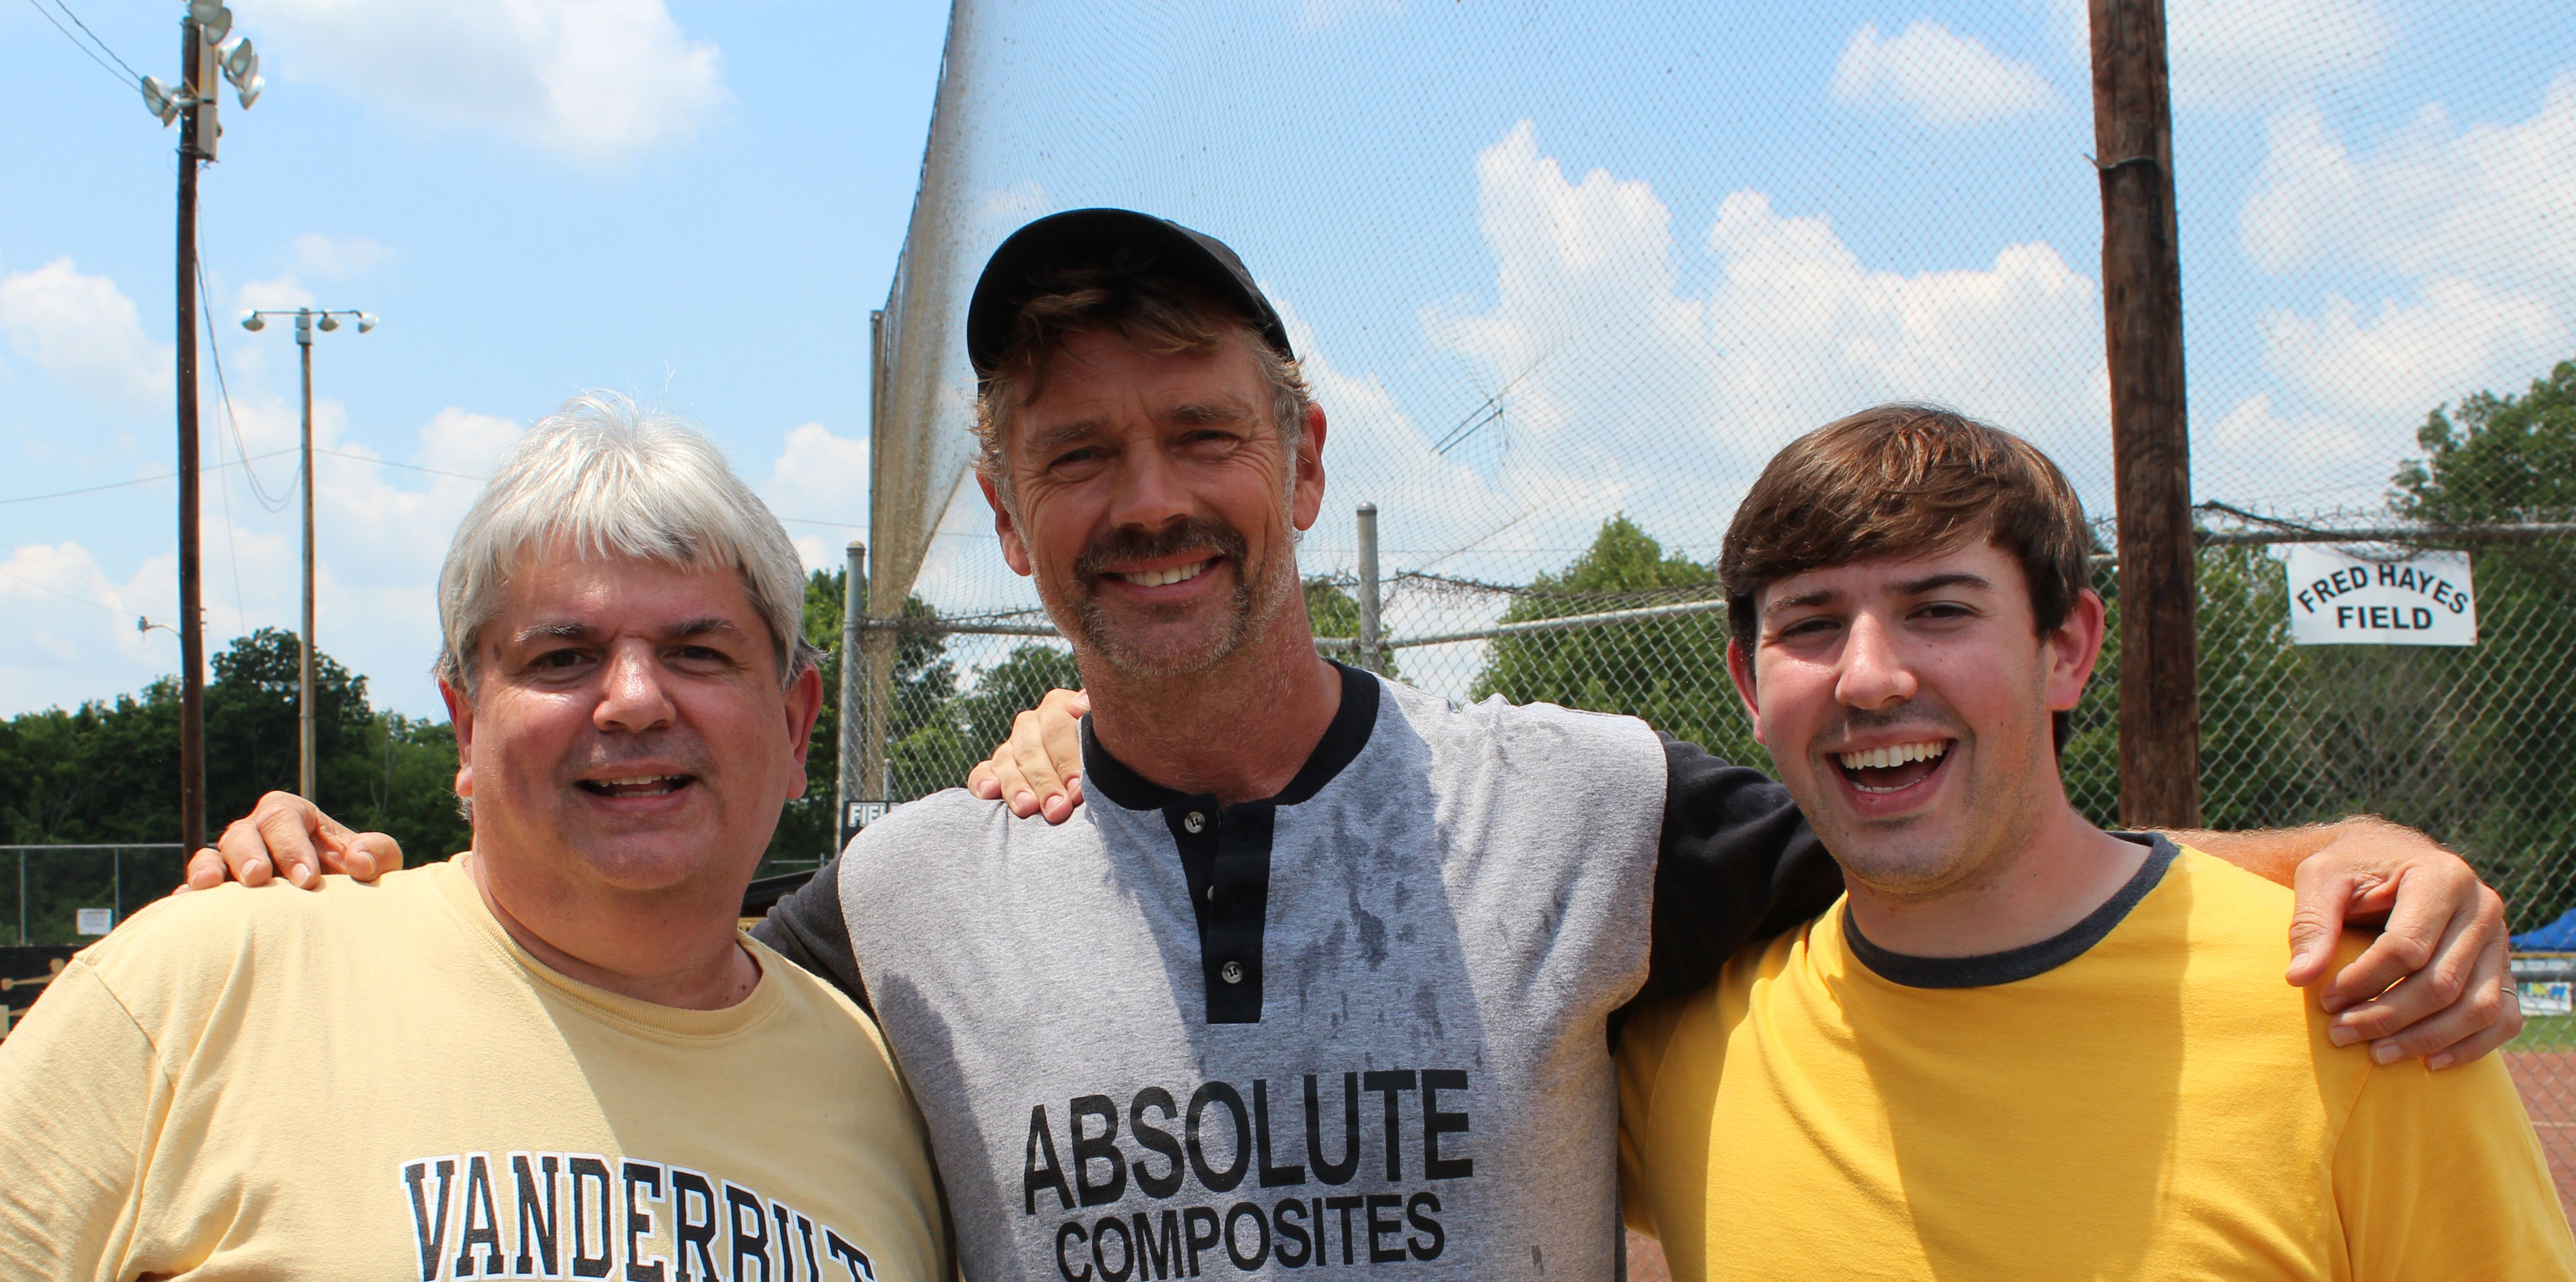 Dave Moody, John Schneider, and Josh Moody on the set of SEASON OF MIRACLES.